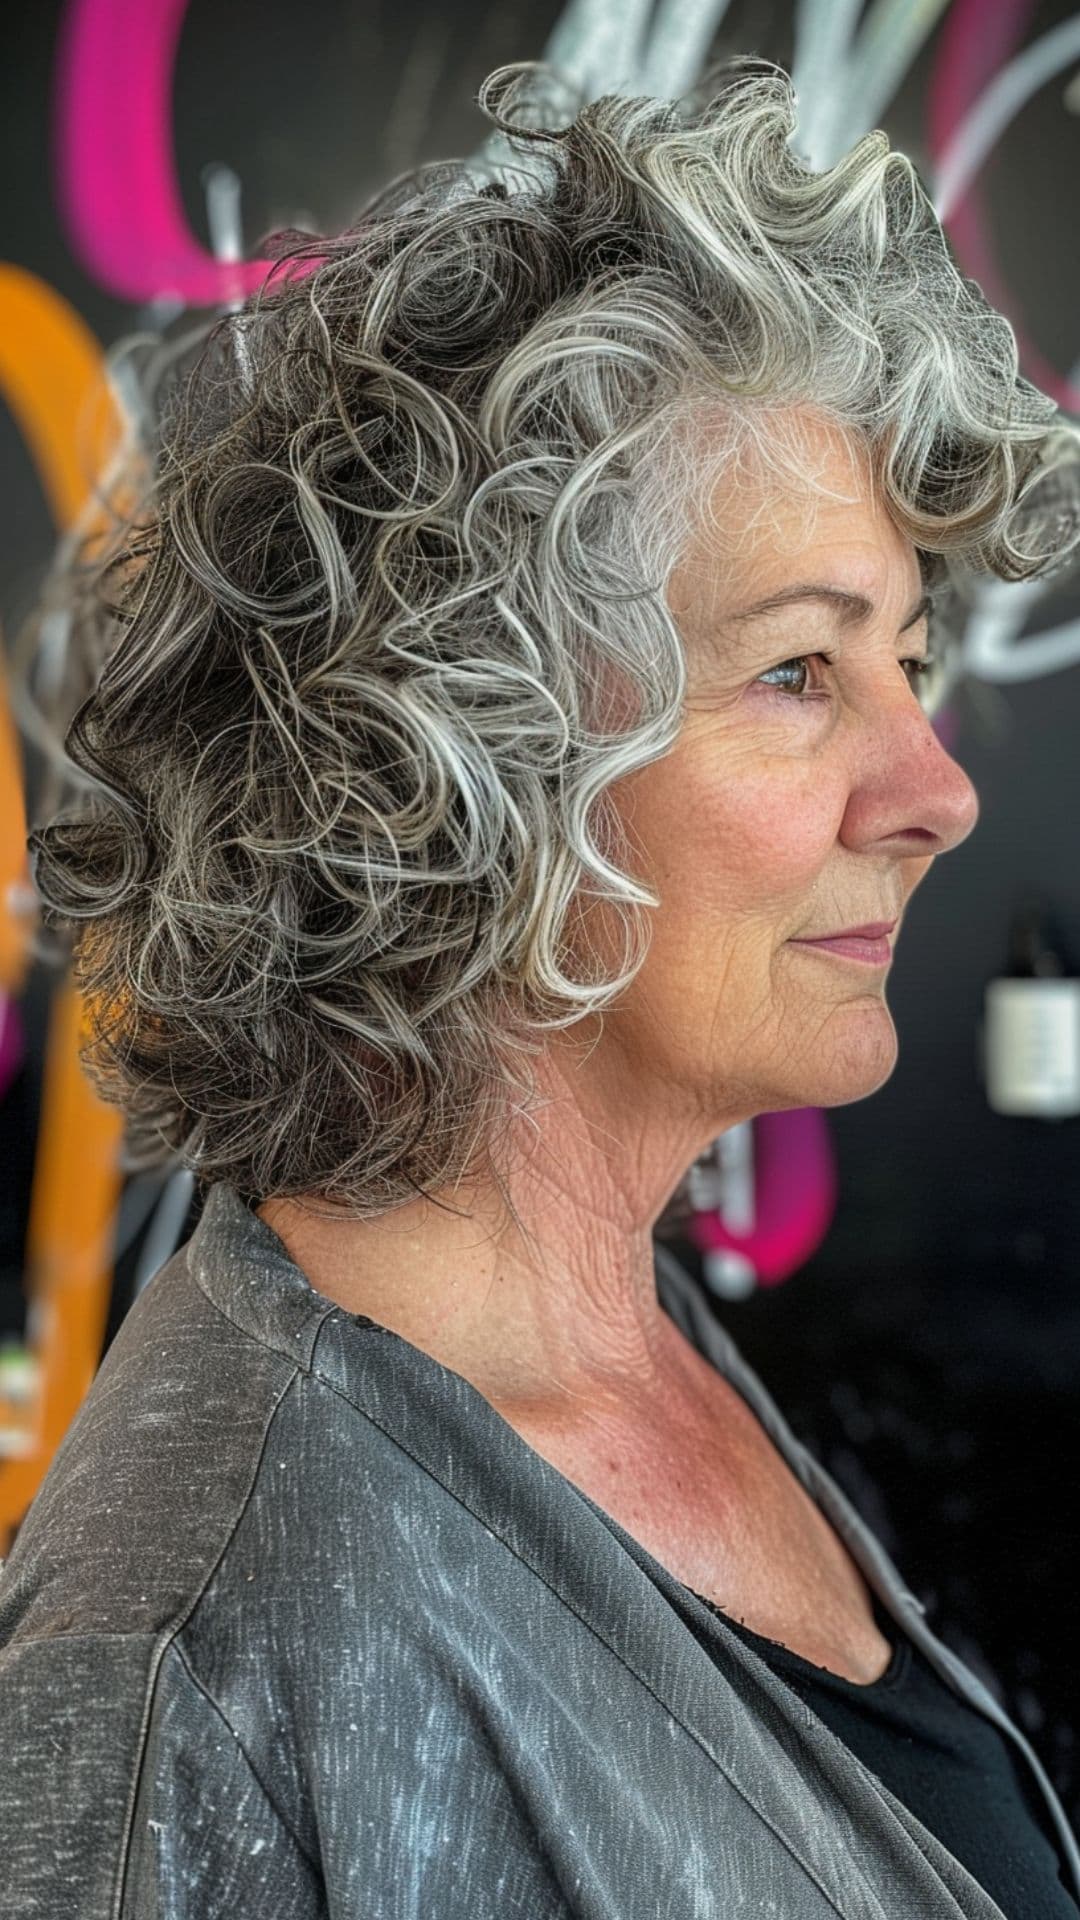 An old woman modelling a curly shag.